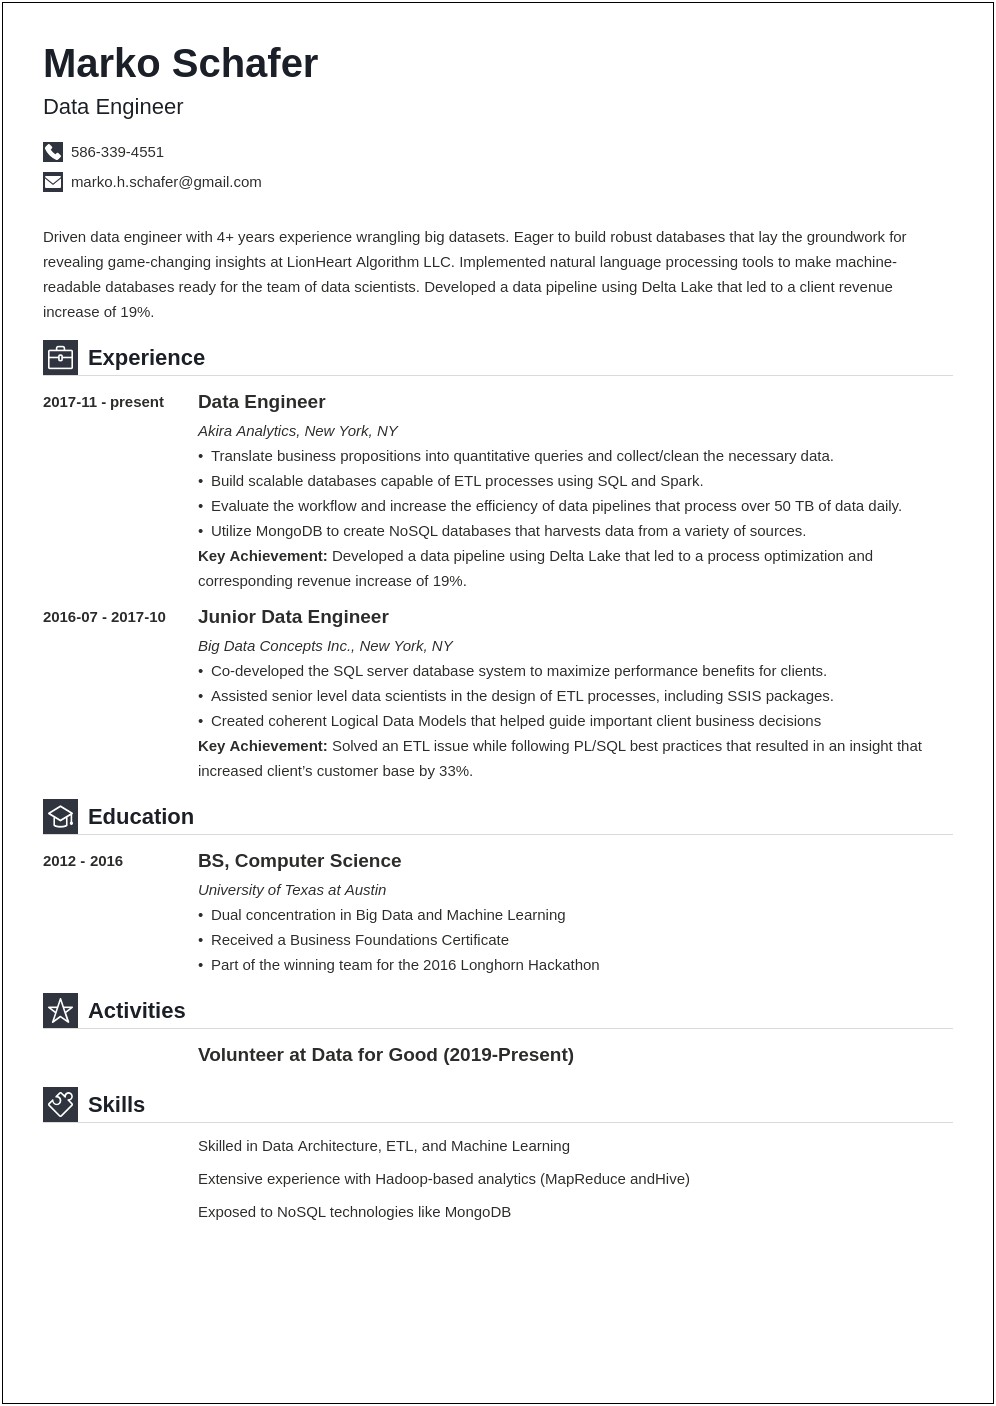 Best Font To Use Engineering Resume